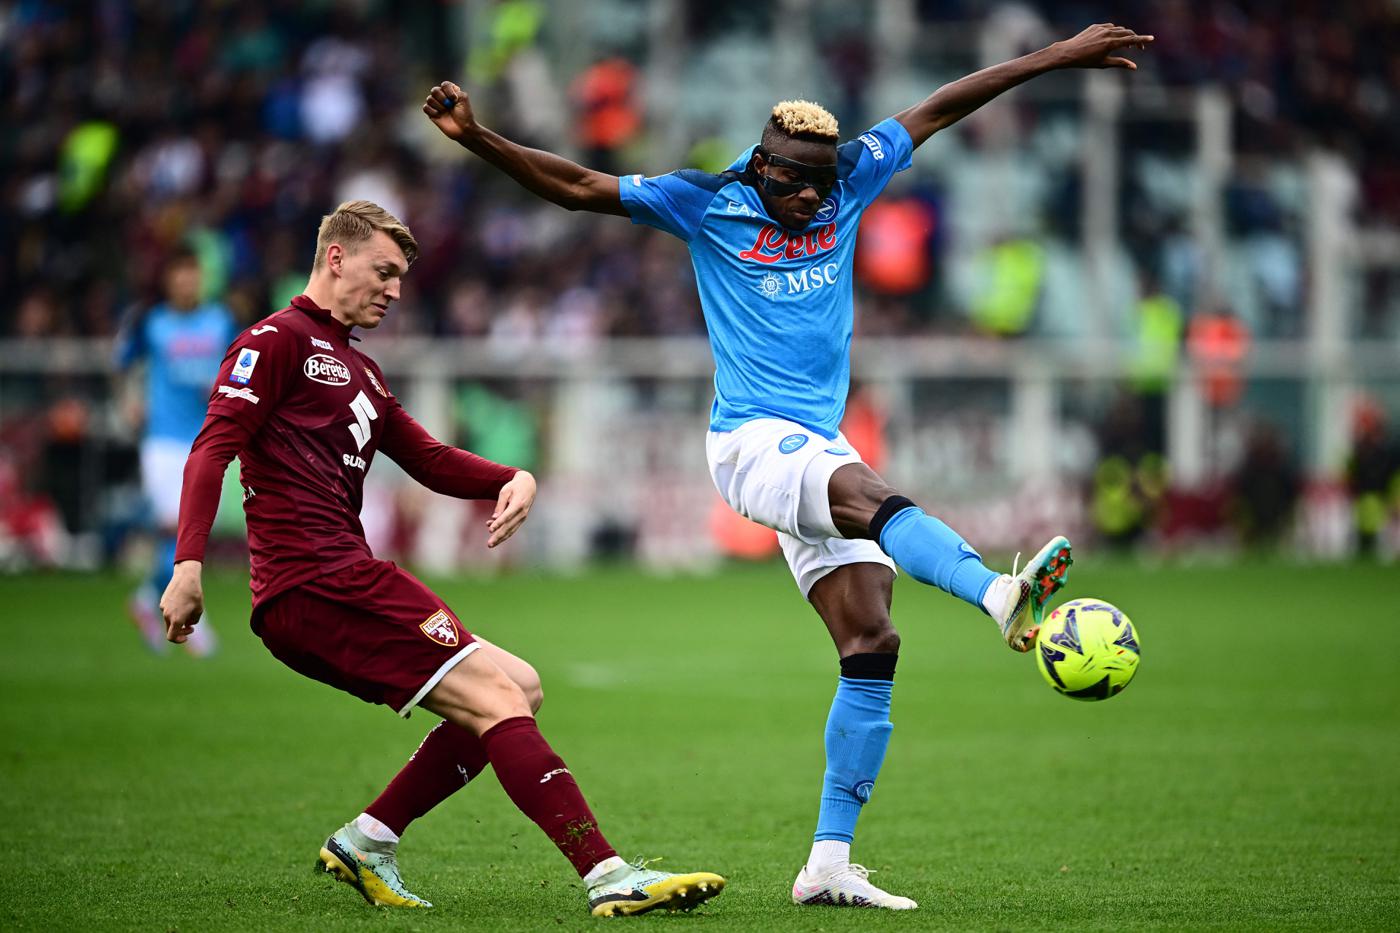 Torino - Napoli: where to watch, online broadcast (March 19)